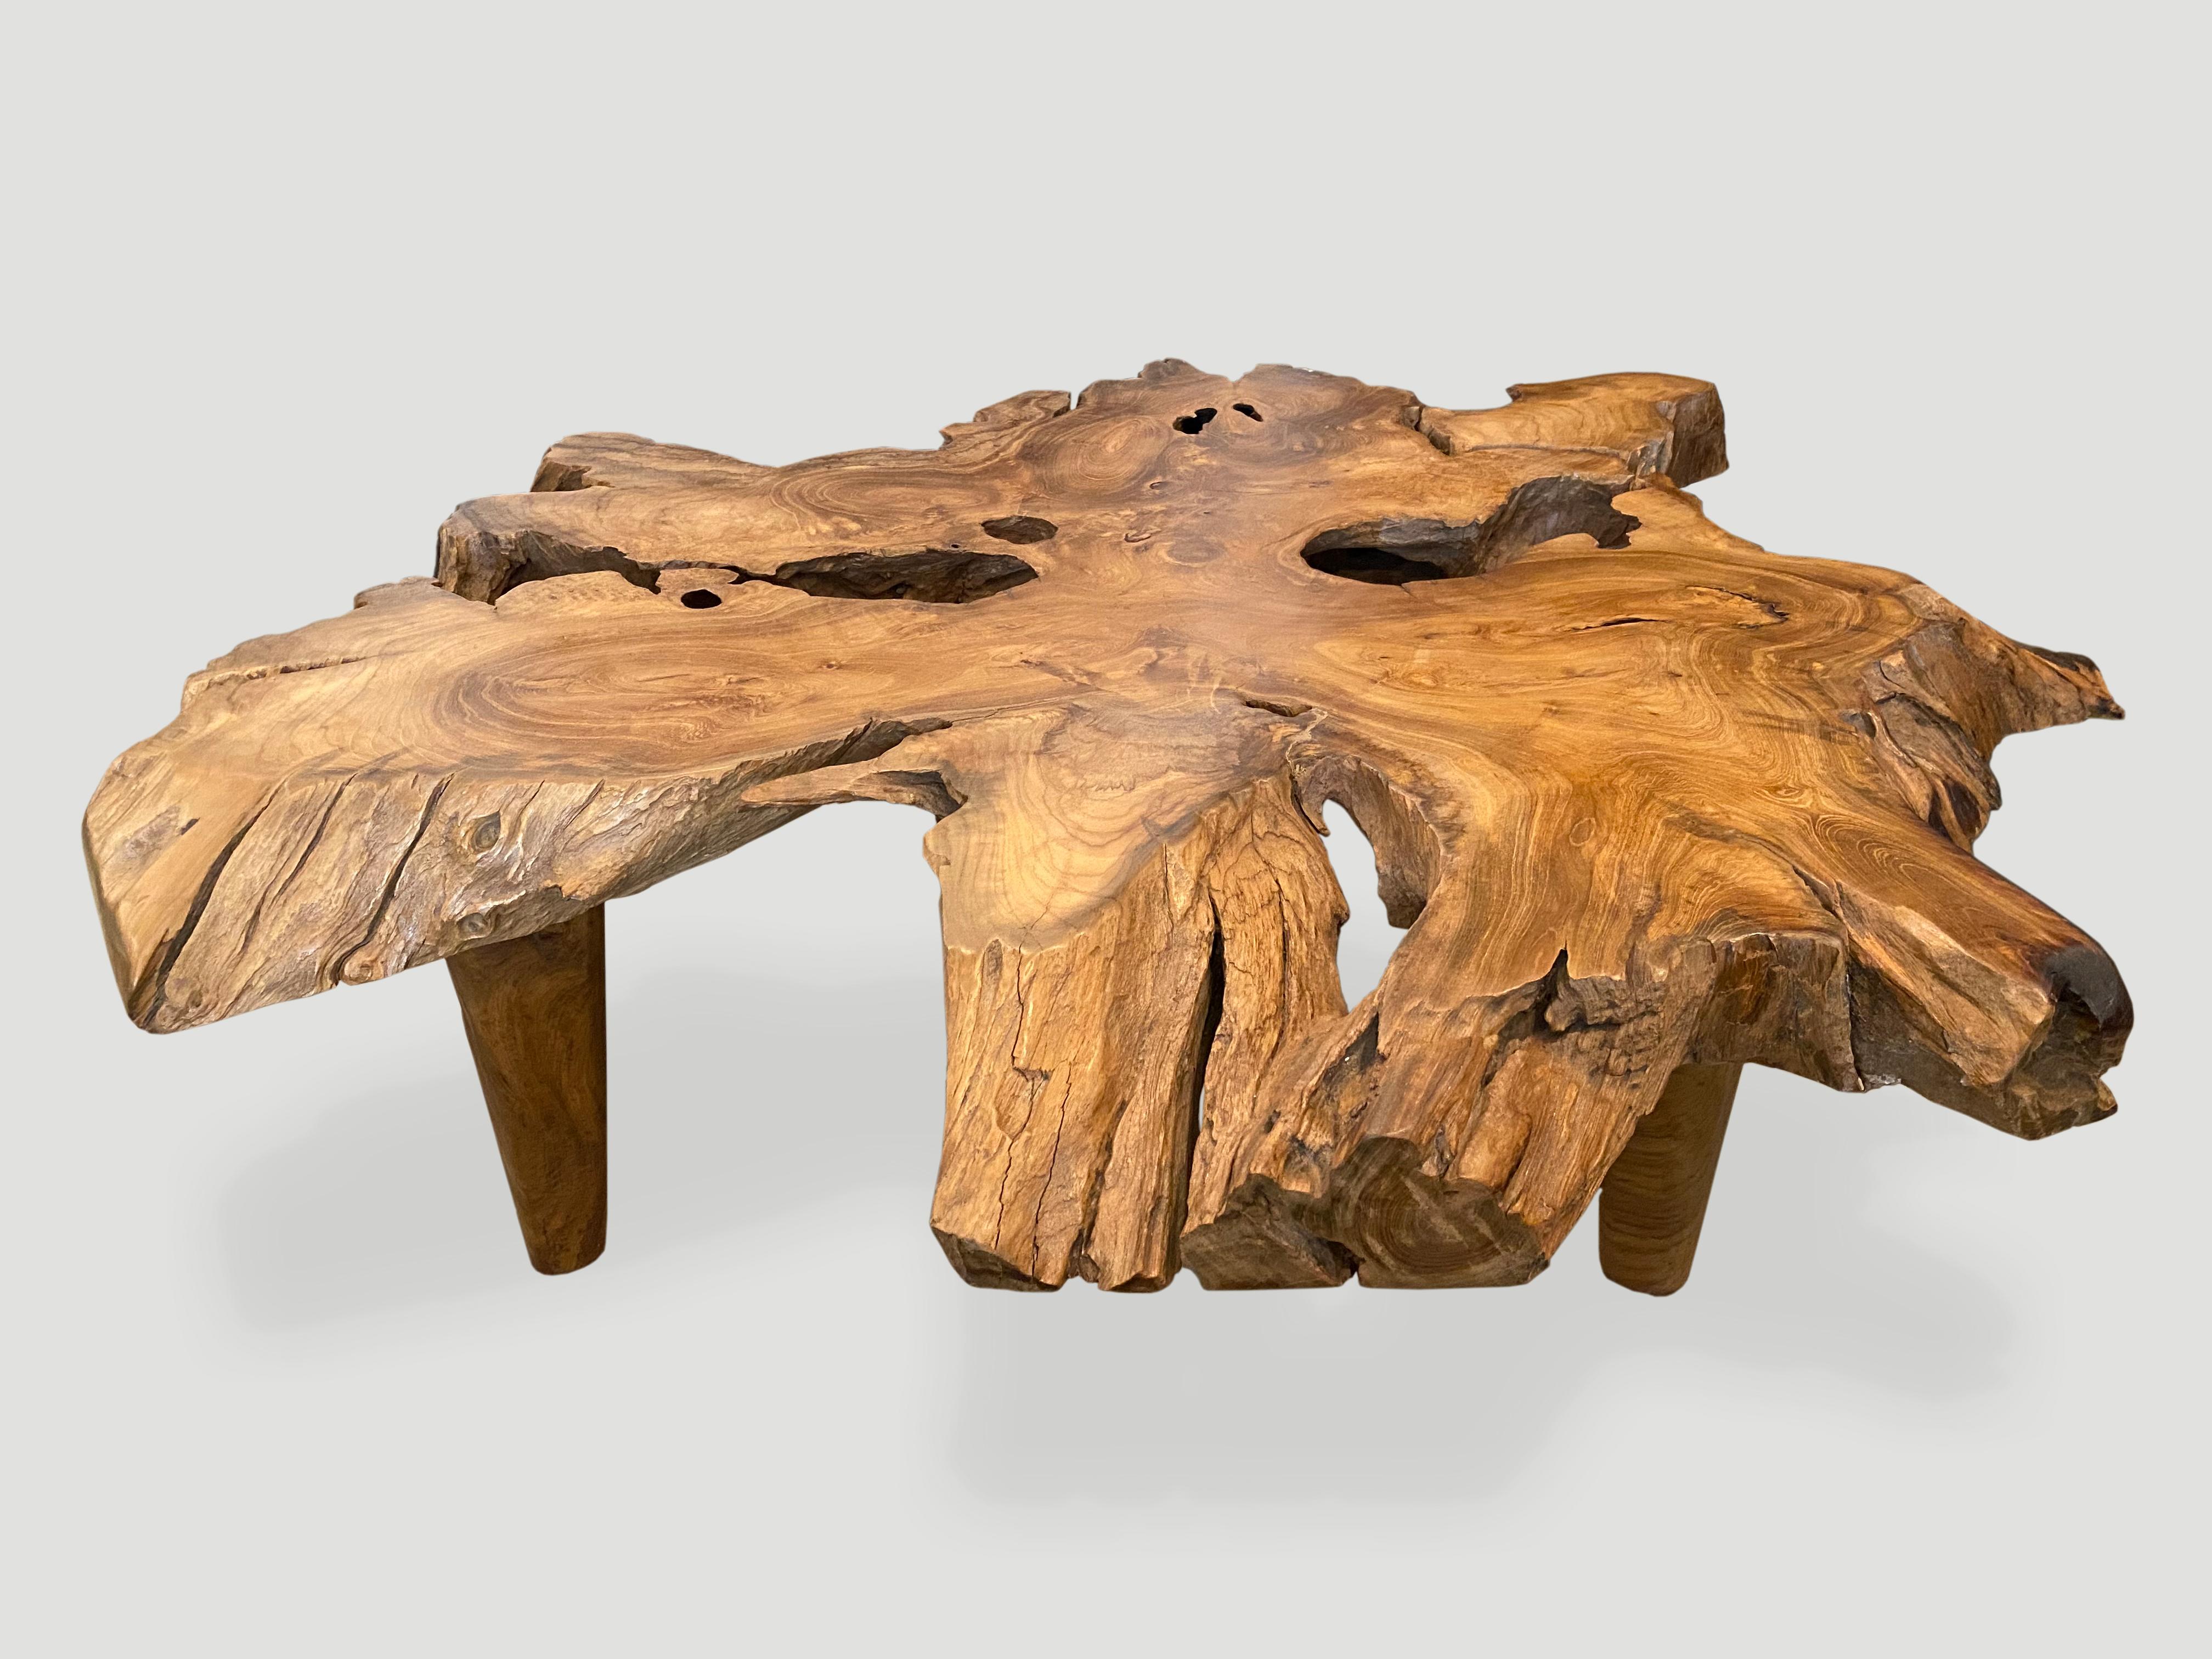 Impressive four inch reclaimed teak wood coffee table with a natural oil polished top. The sides are left natural in contrast. Floating on mid century style teak cone legs. Organic with a twist.

Own an Andrianna Shamaris original.

Andrianna